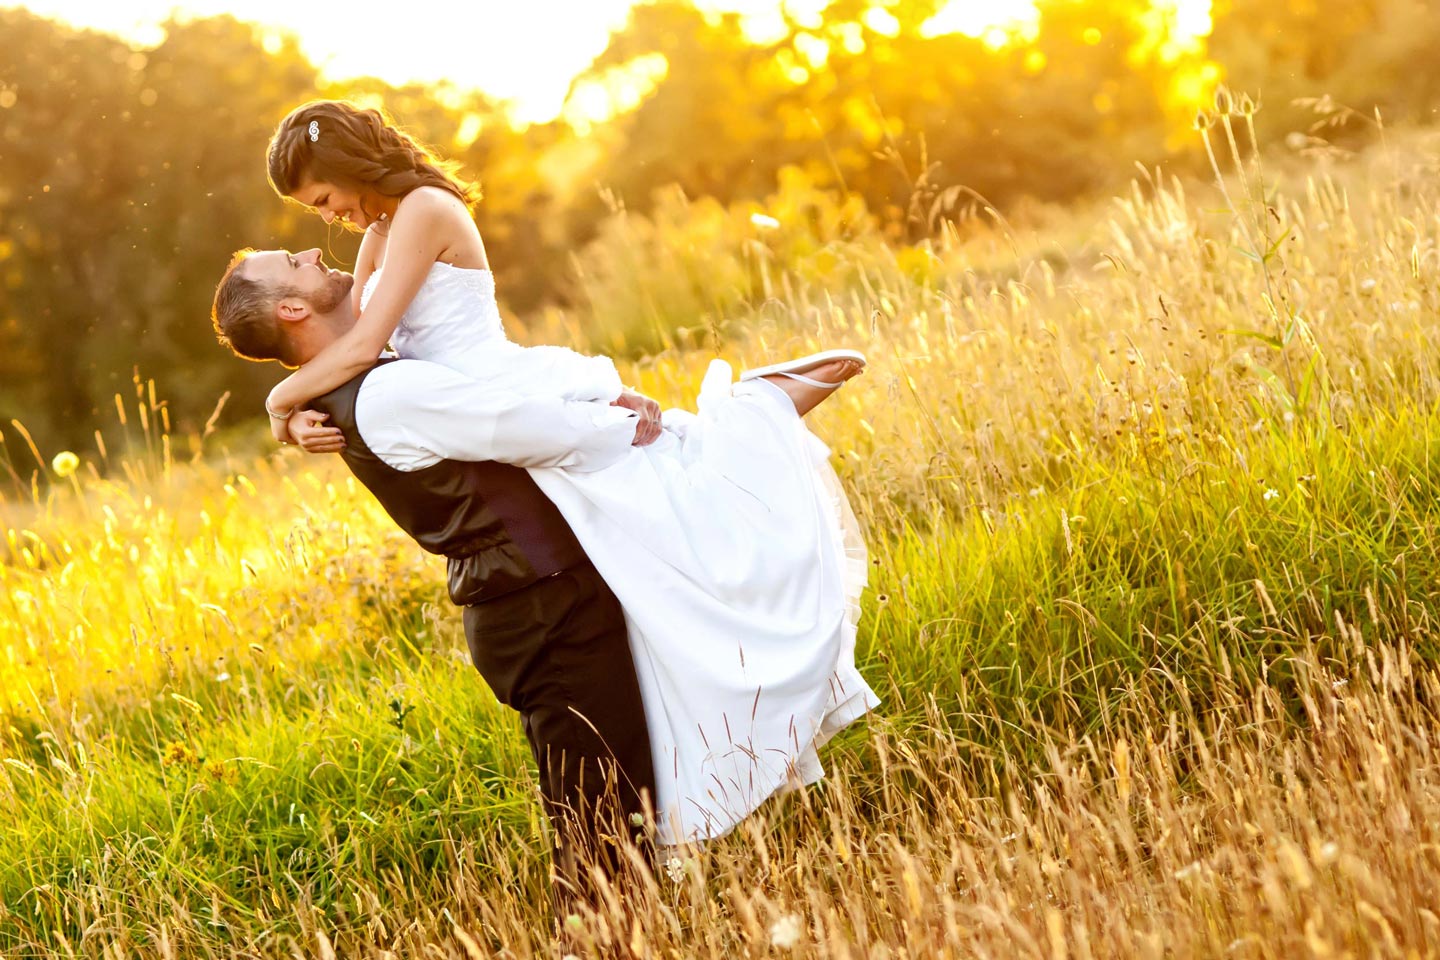 groom pics up bride in a field